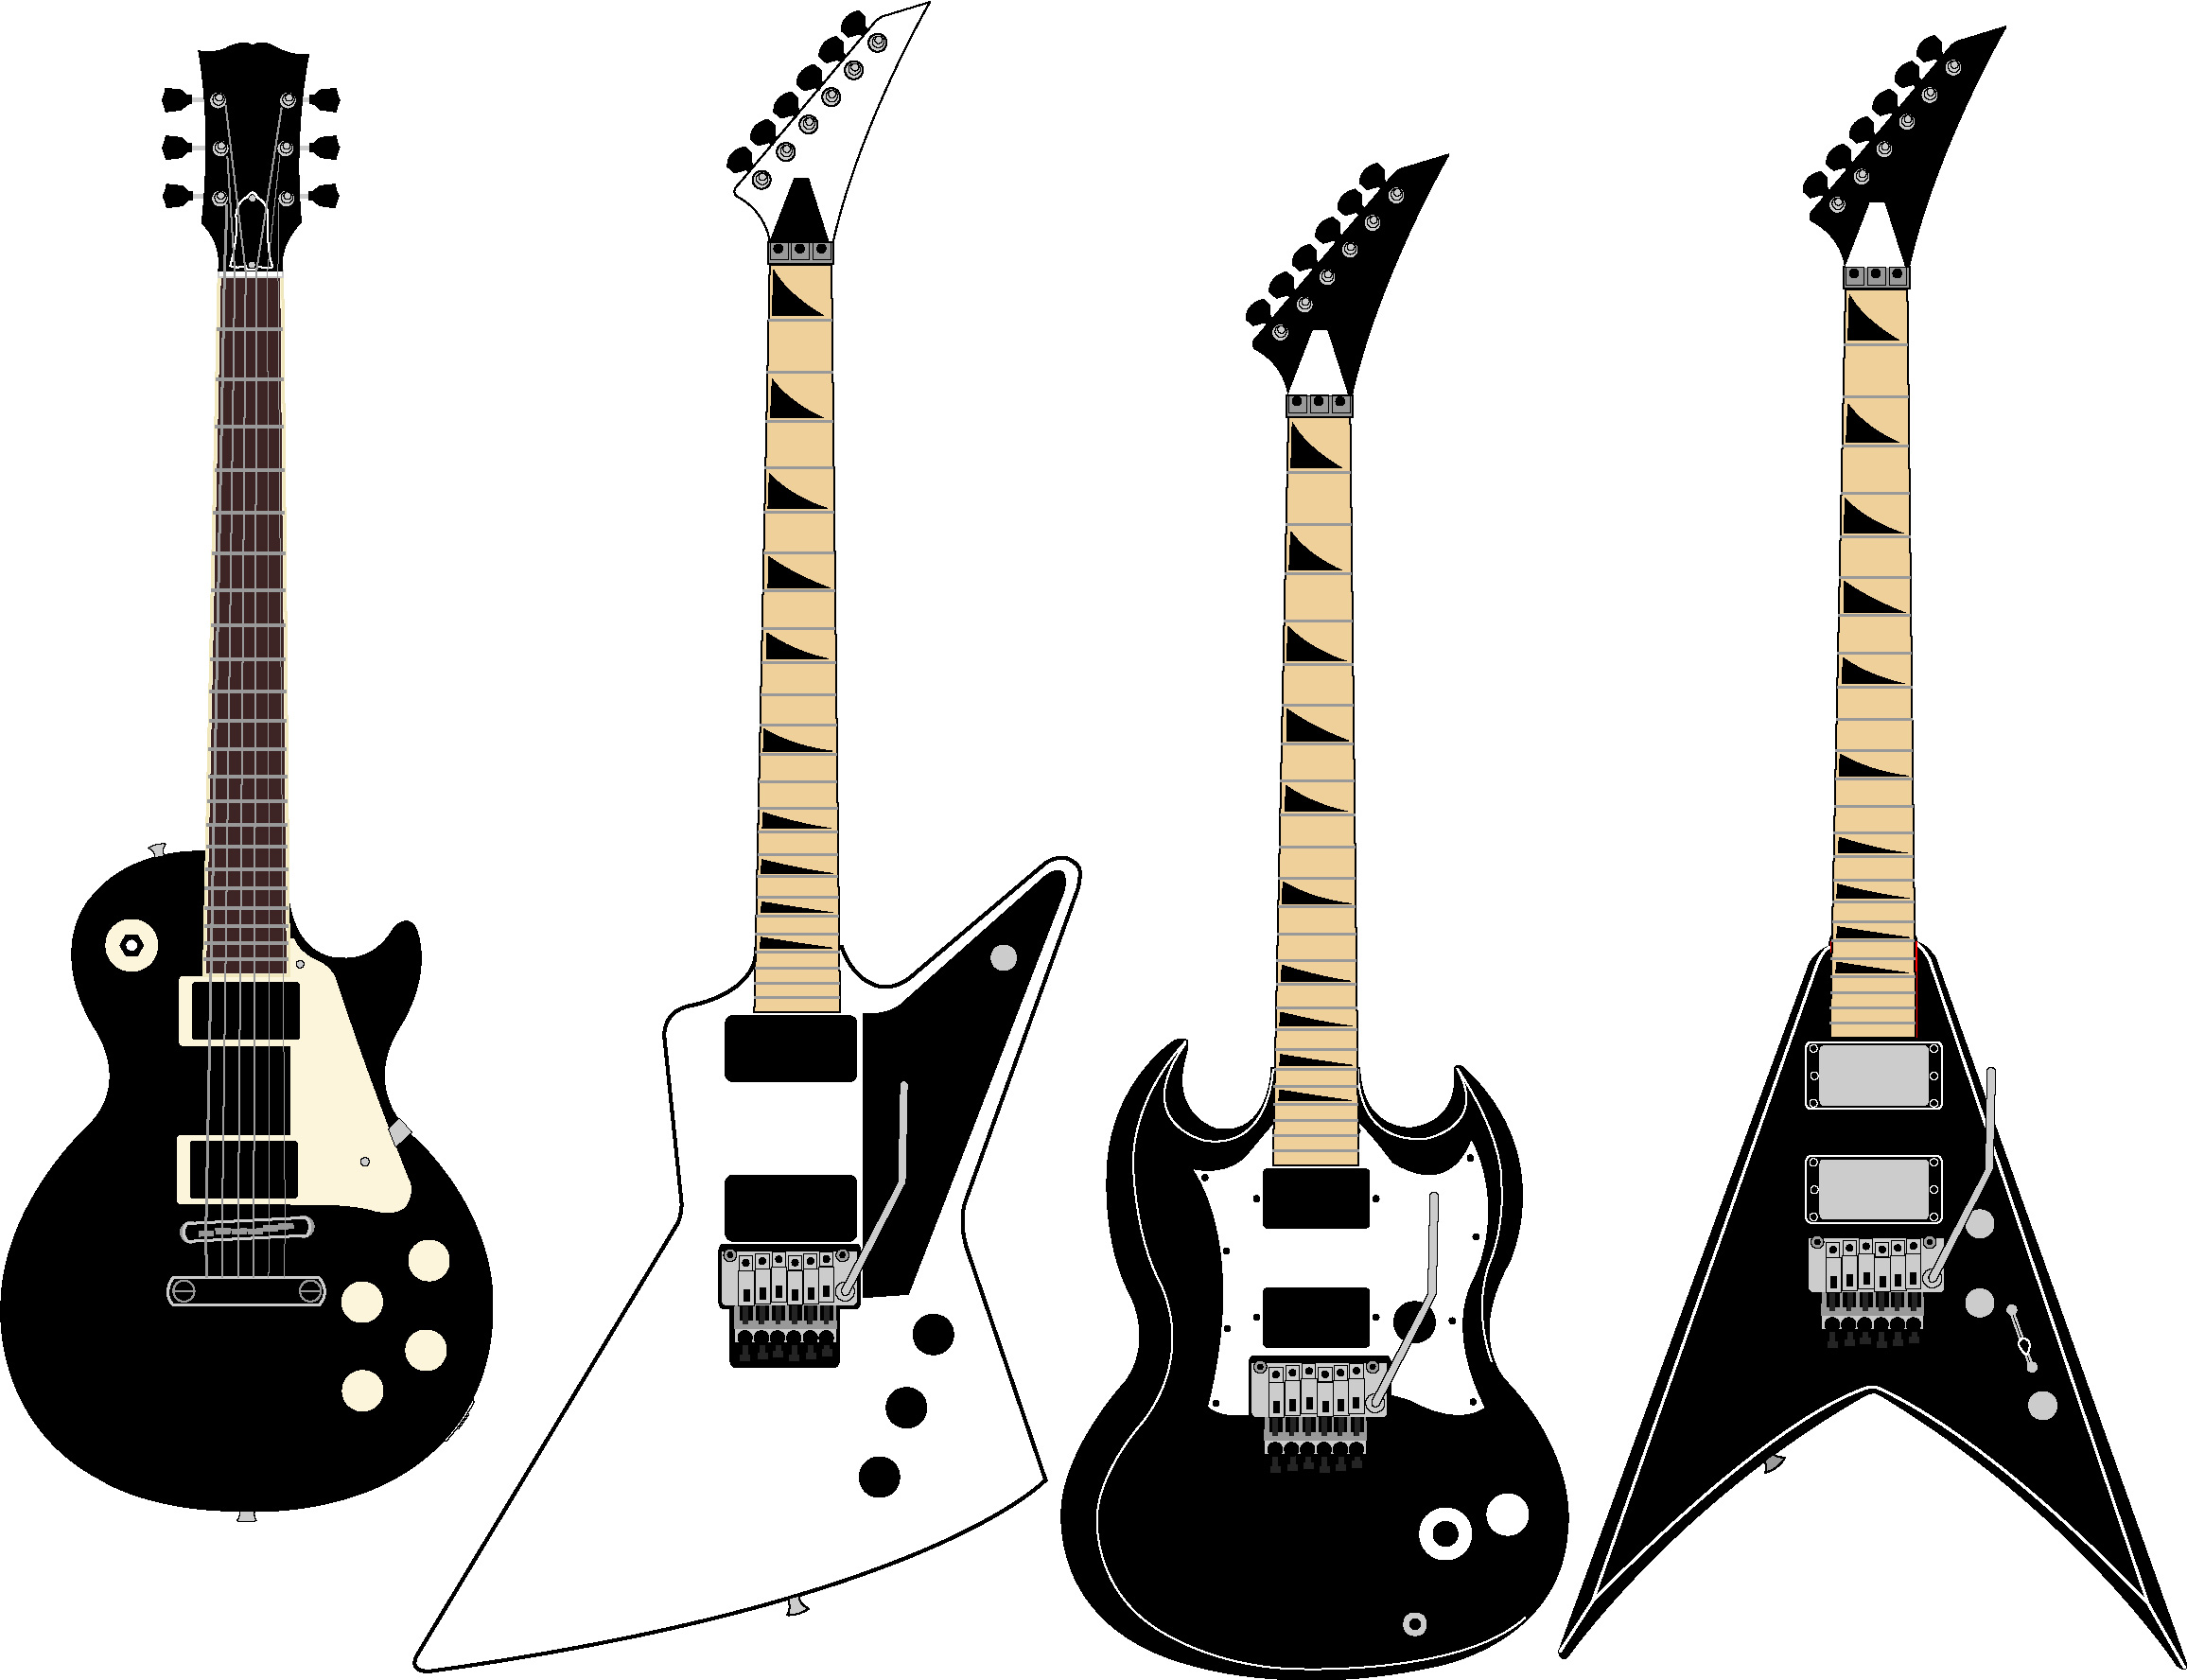 Free Guitar Vector, Download Free Clip Art, Free Clip Art on Clipart.